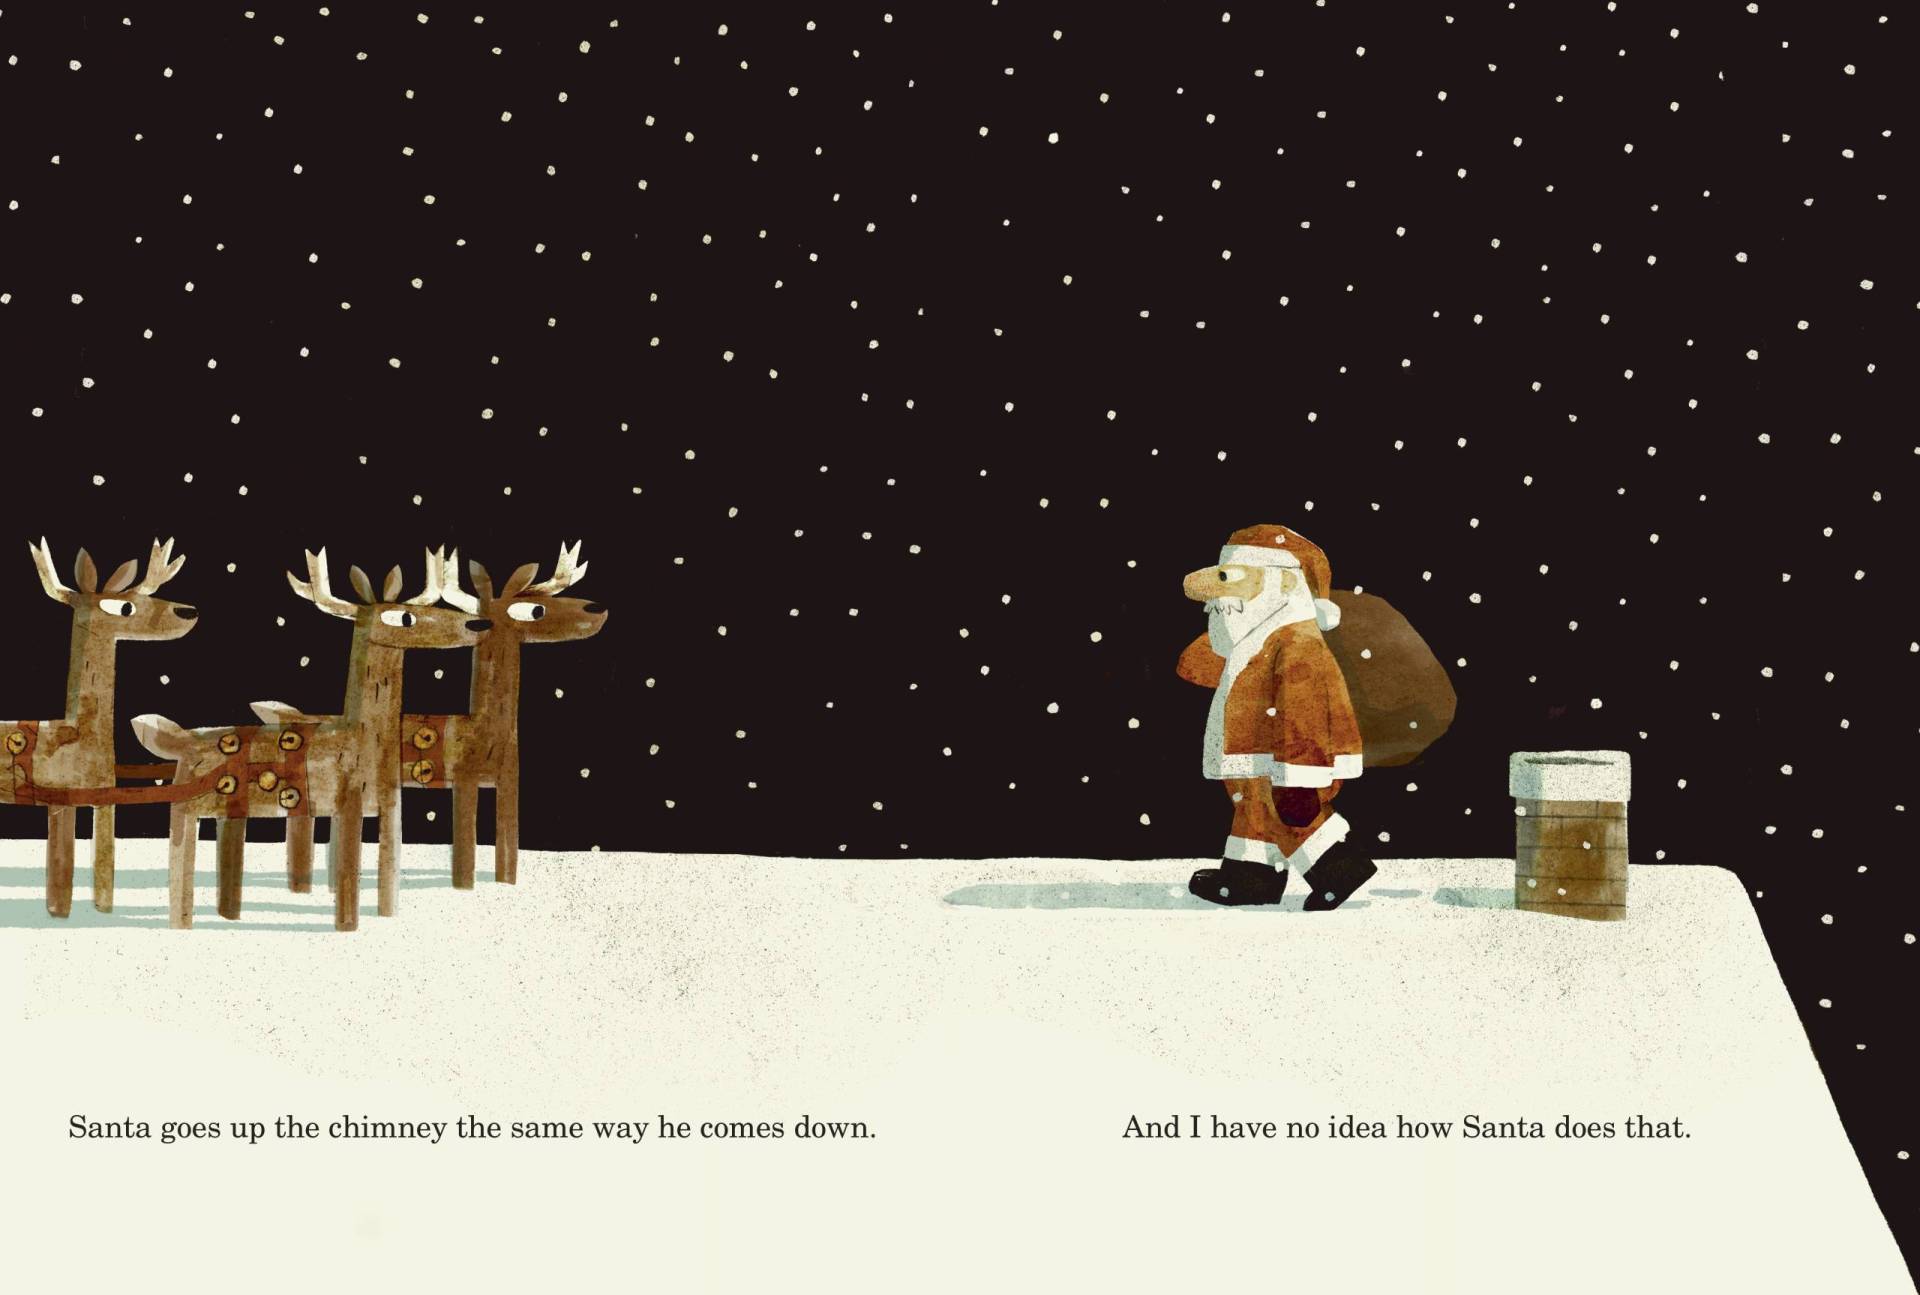 An illustration of Santa standing on a snowy roof, holding a sack over his shoulder. A chimney is behind him. He is facing a group of three reindeer.